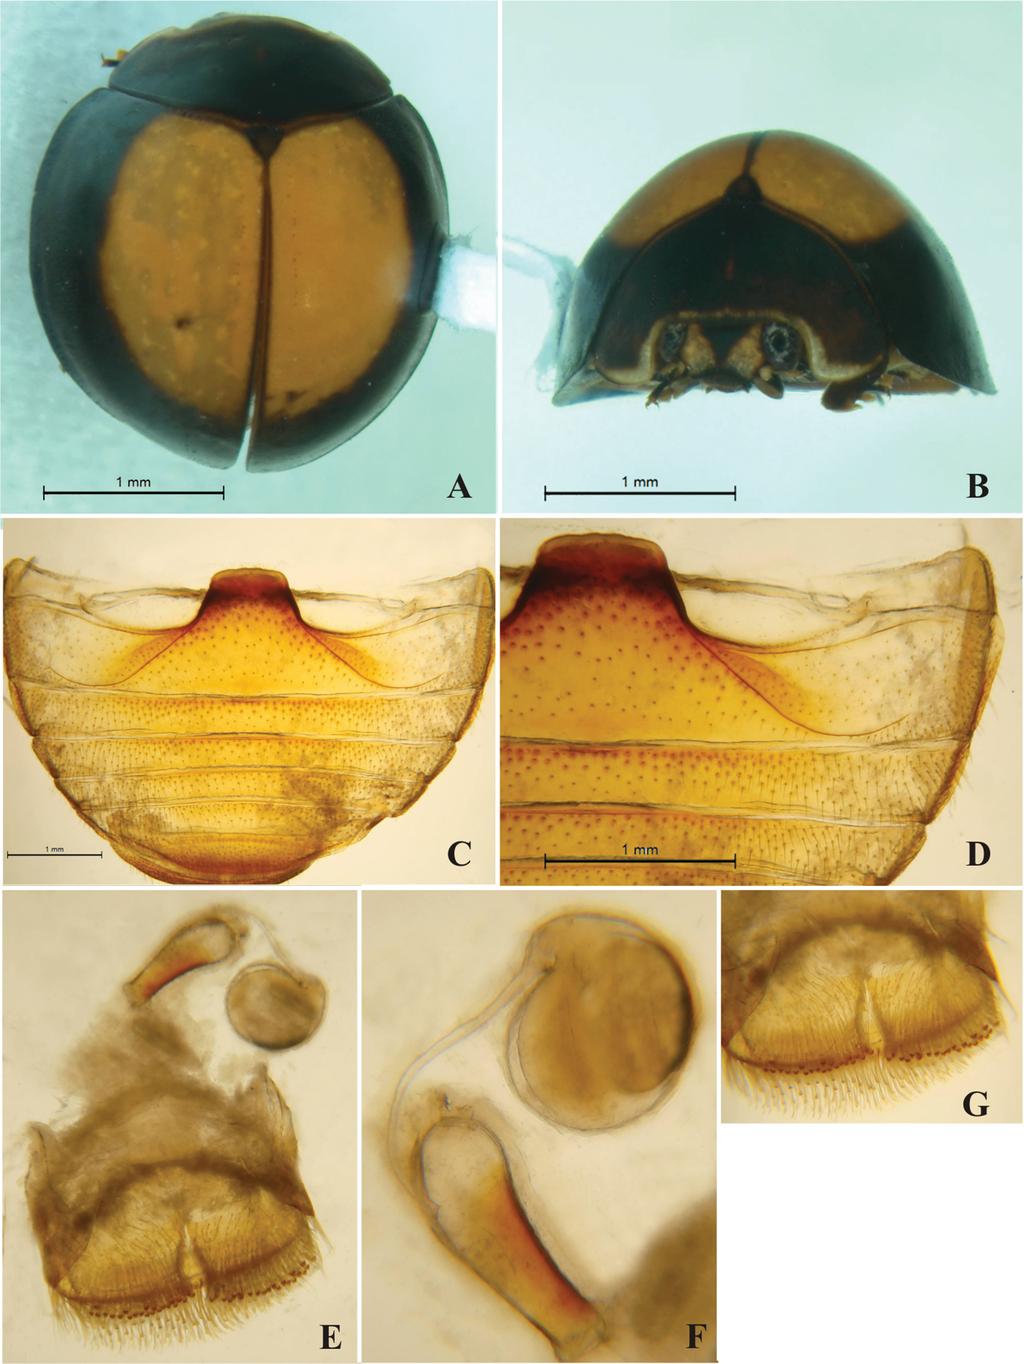 FIGURE 2. Menoscelis cordata sp. nov. habitus and details of morphology of female holotype. A B. habitus in dorsal (A) and frontal (B) views; C.